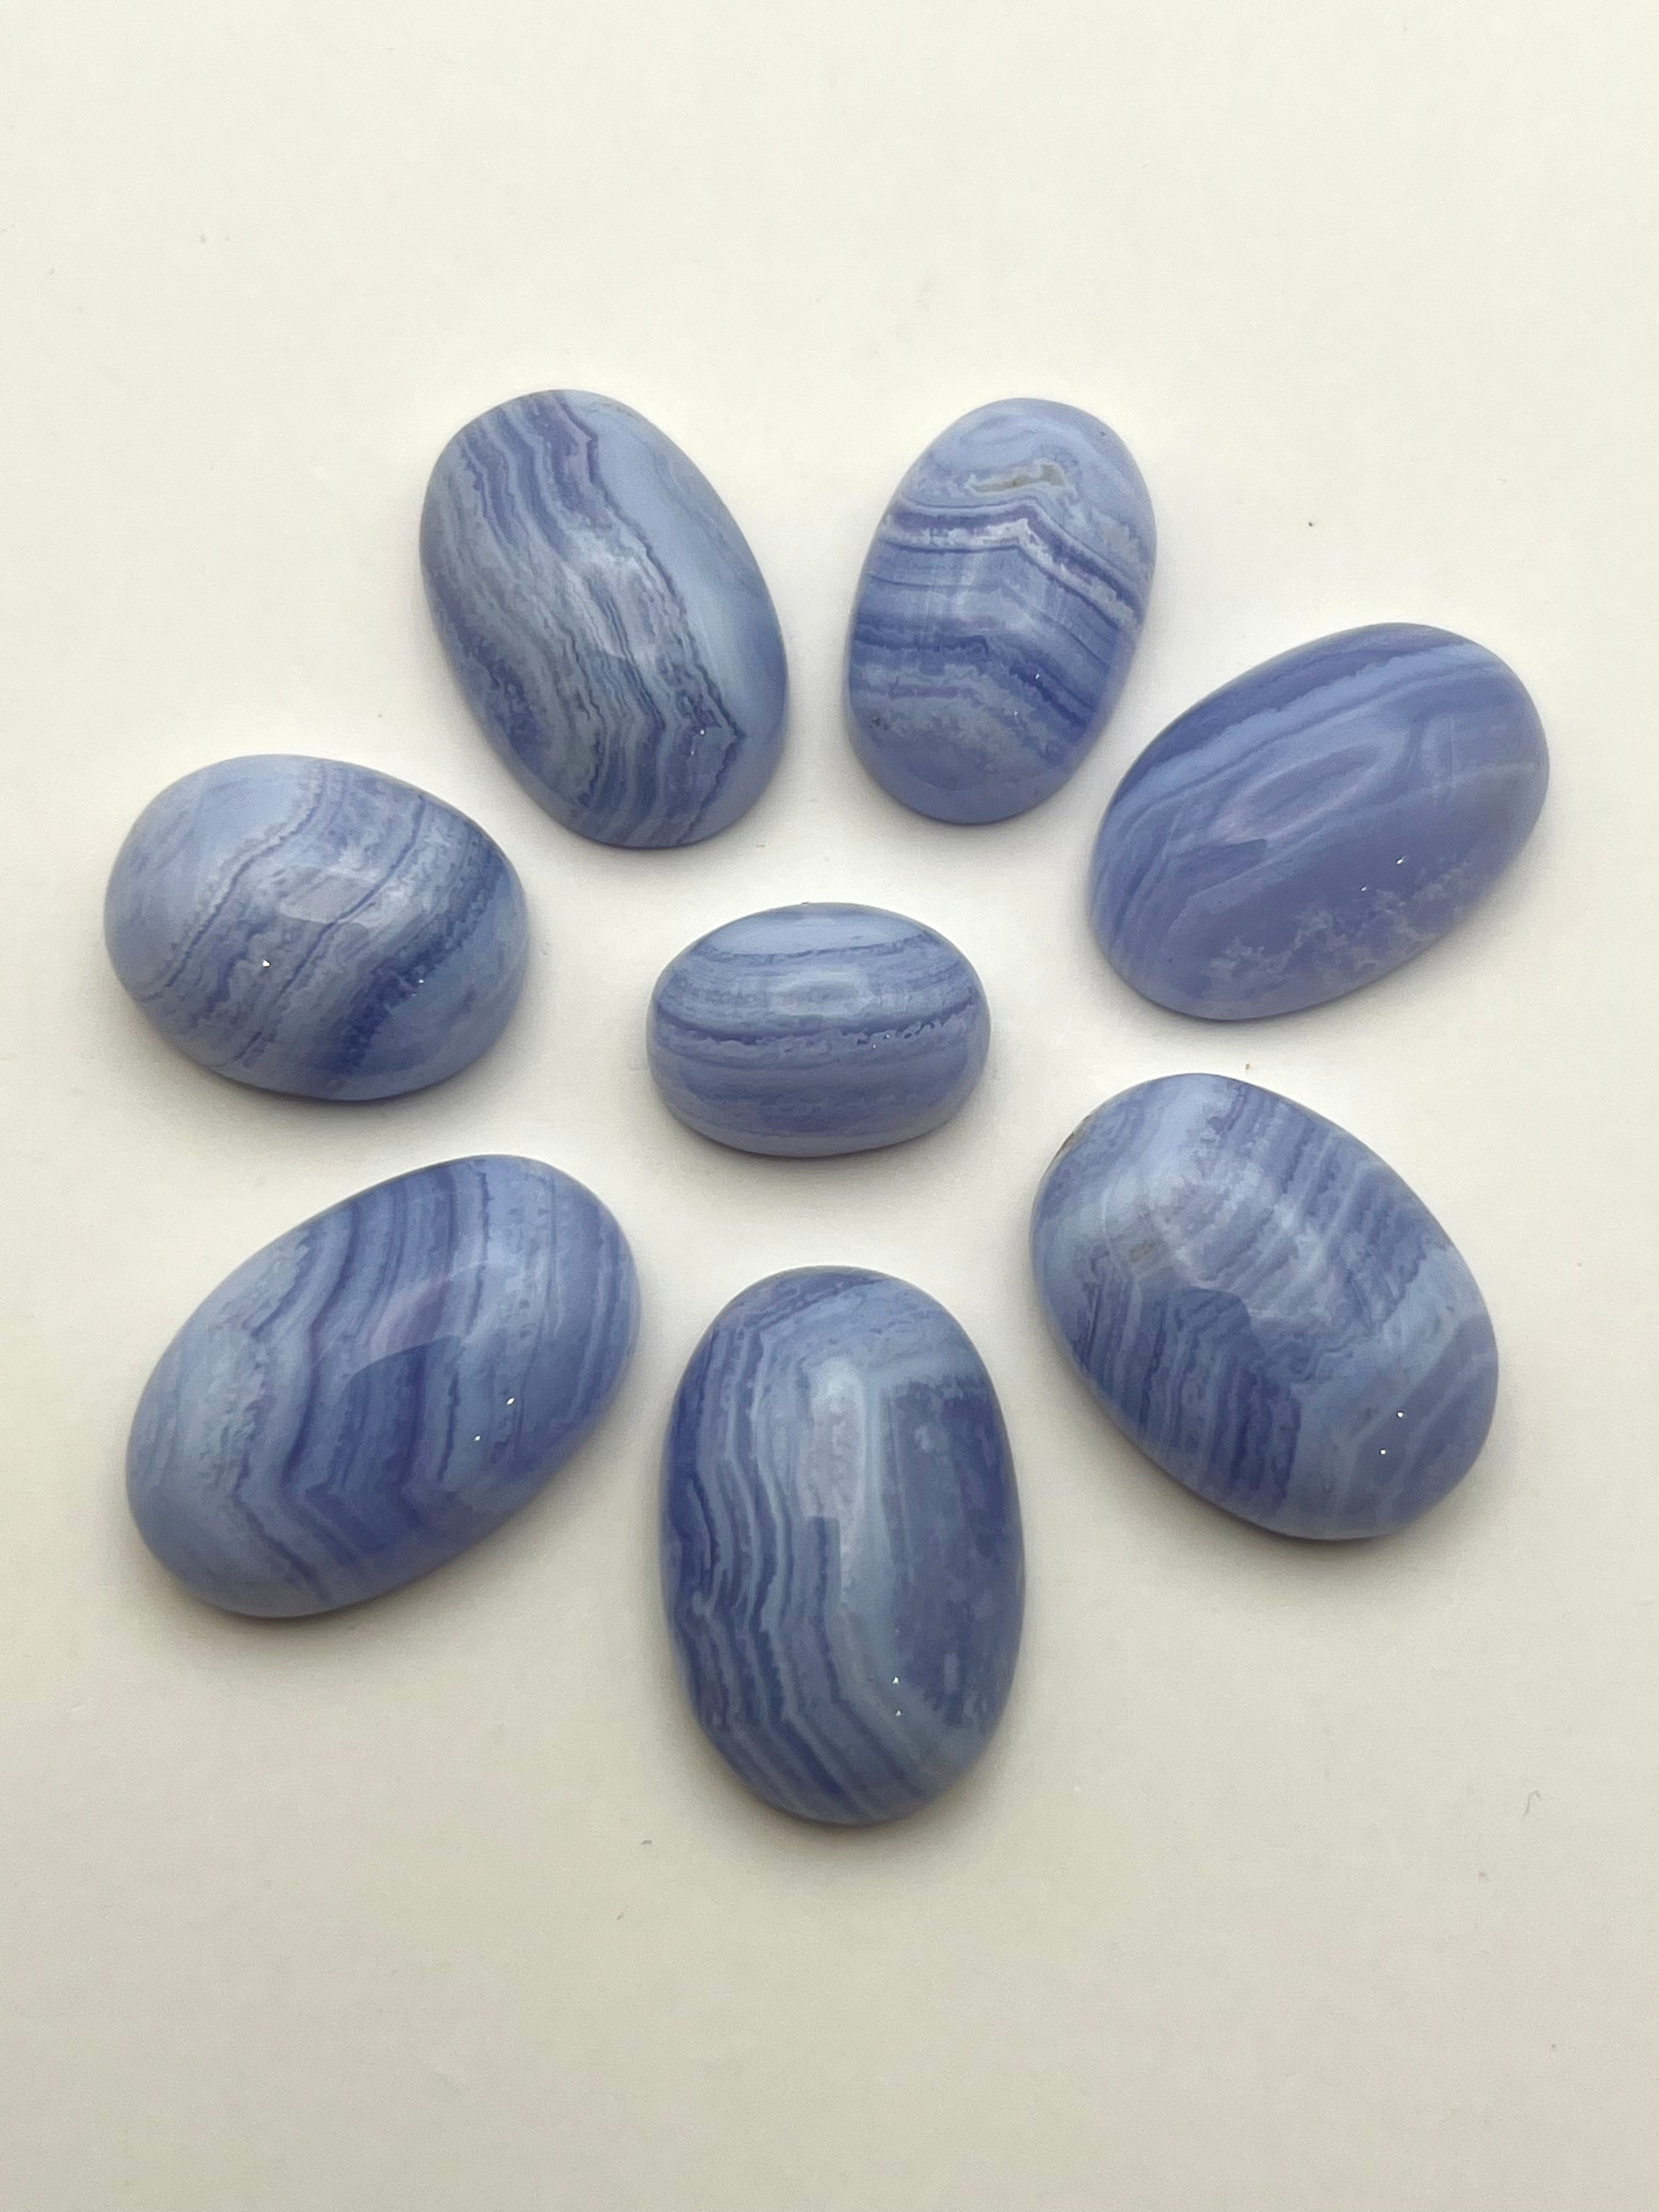 Blue Lace Agate Cabochon Intuitively Selected - Earthly Secrets